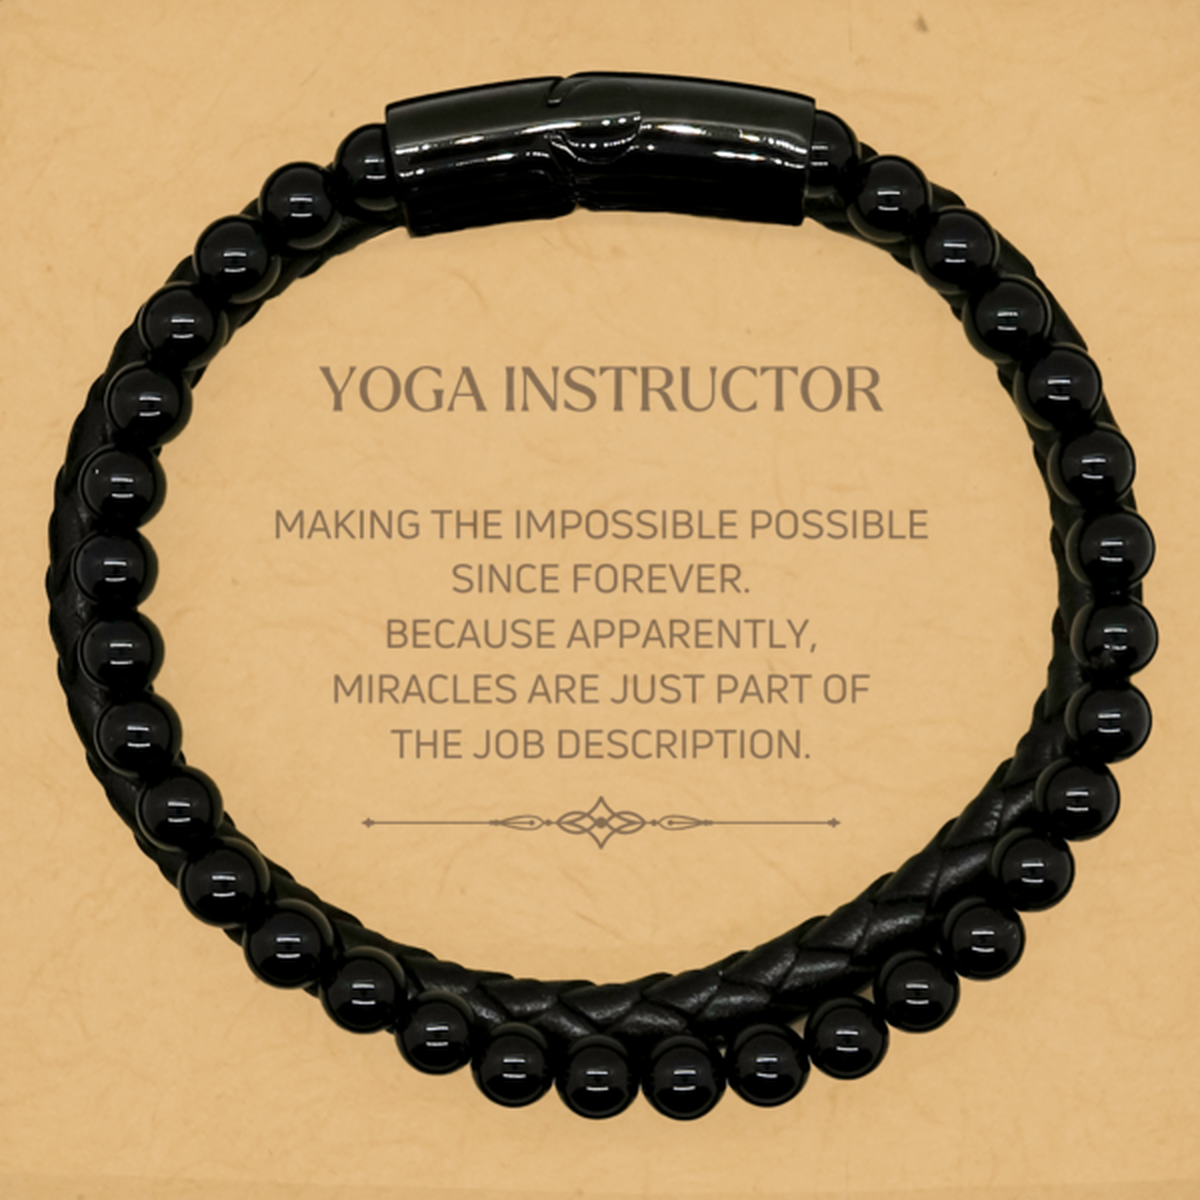 Funny Yoga Instructor Gifts, Miracles are just part of the job description, Inspirational Birthday Stone Leather Bracelets For Yoga Instructor, Men, Women, Coworkers, Friends, Boss